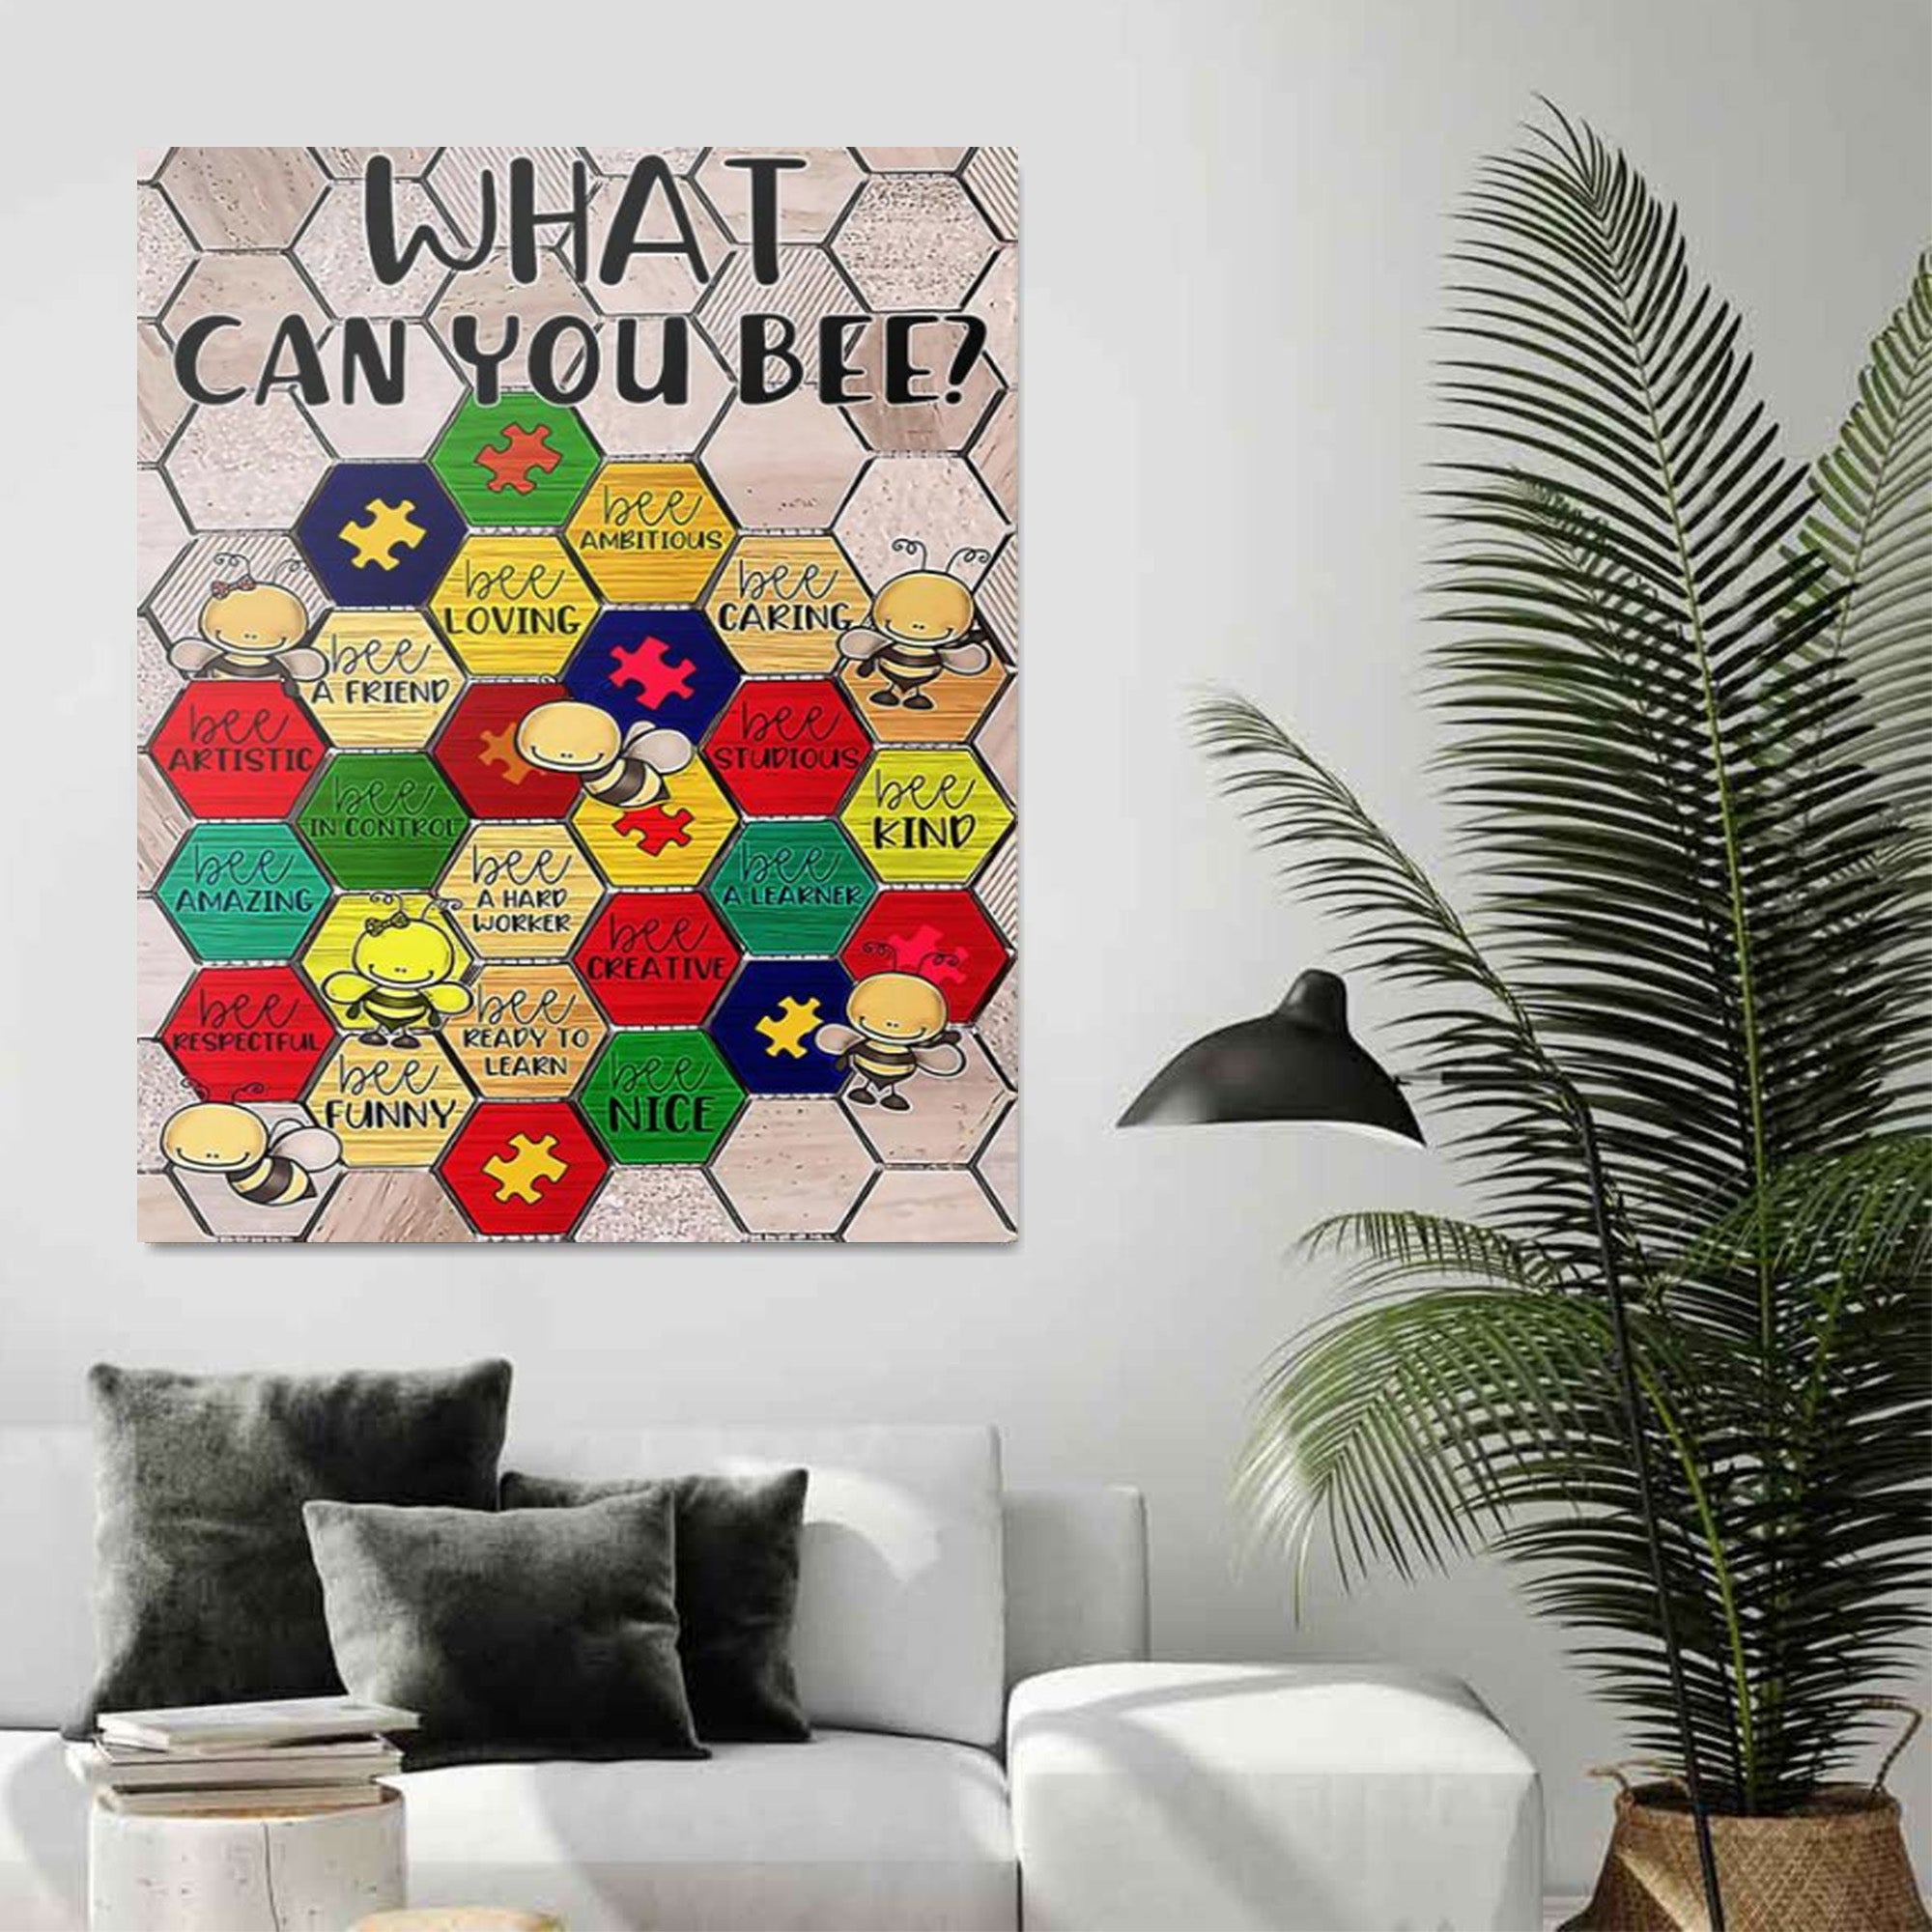 Autism Poster – What Can You Bee?